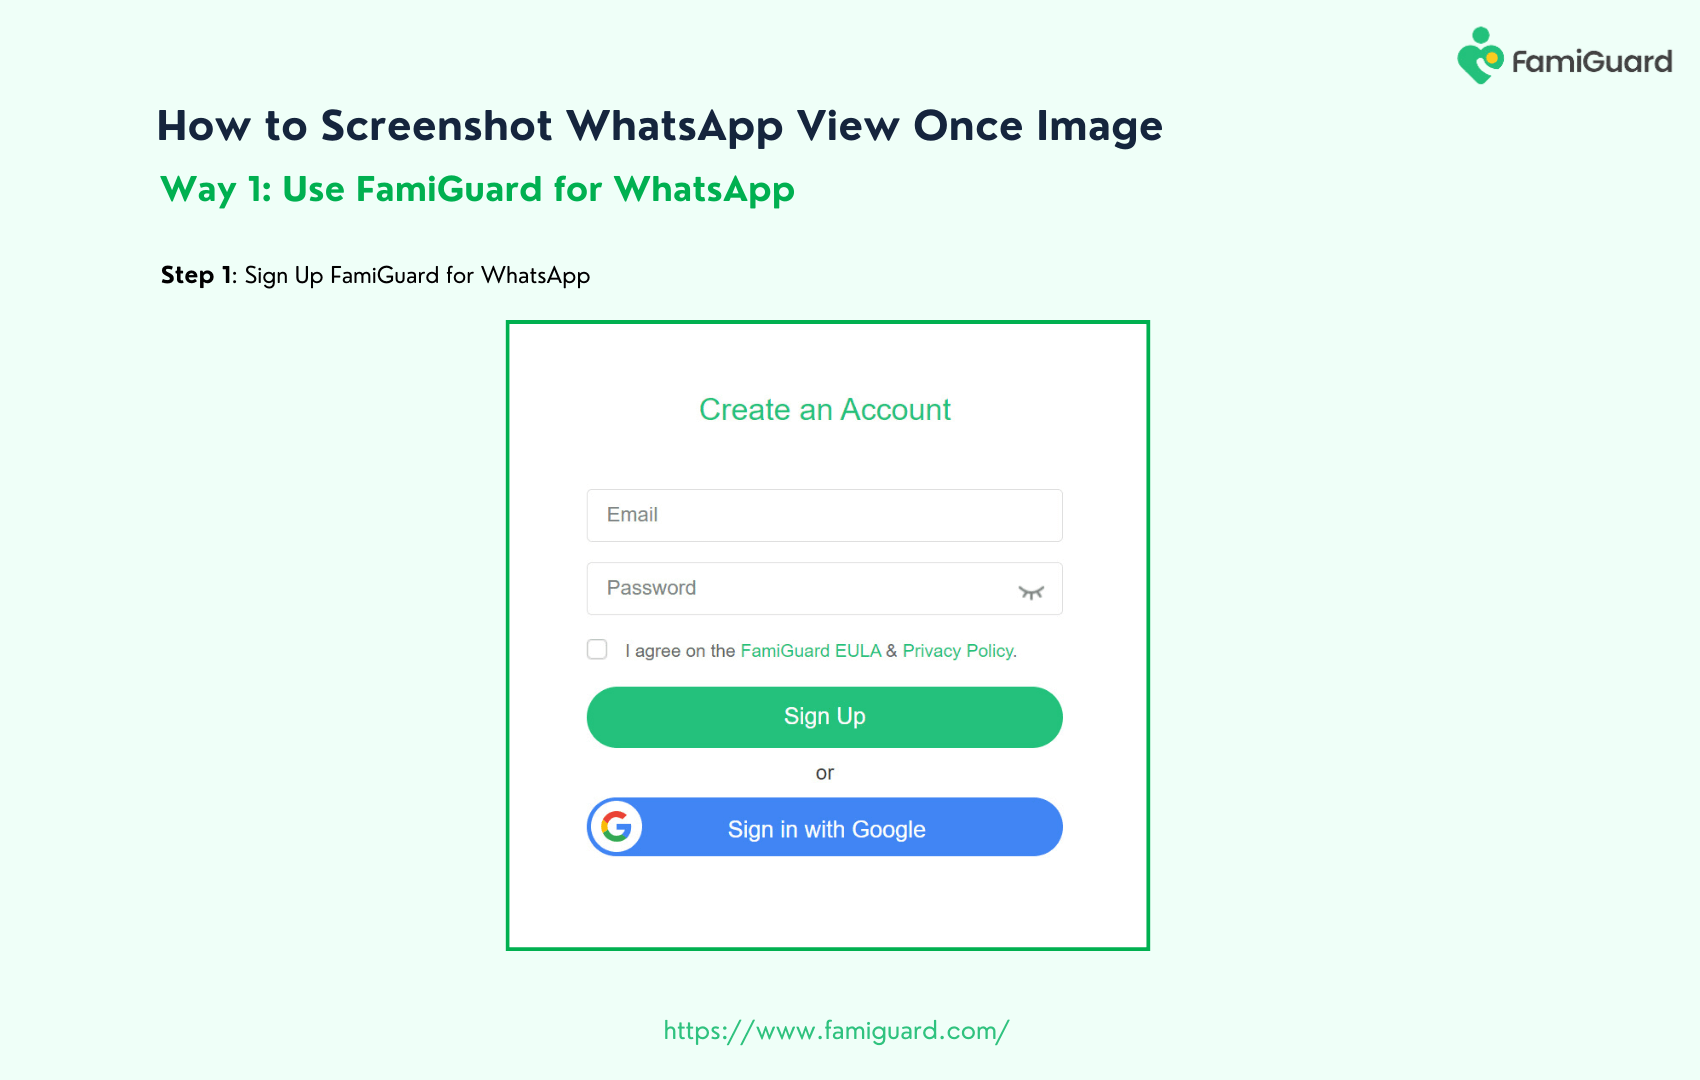  How to Sign Up FamiGuard for WhatsApp